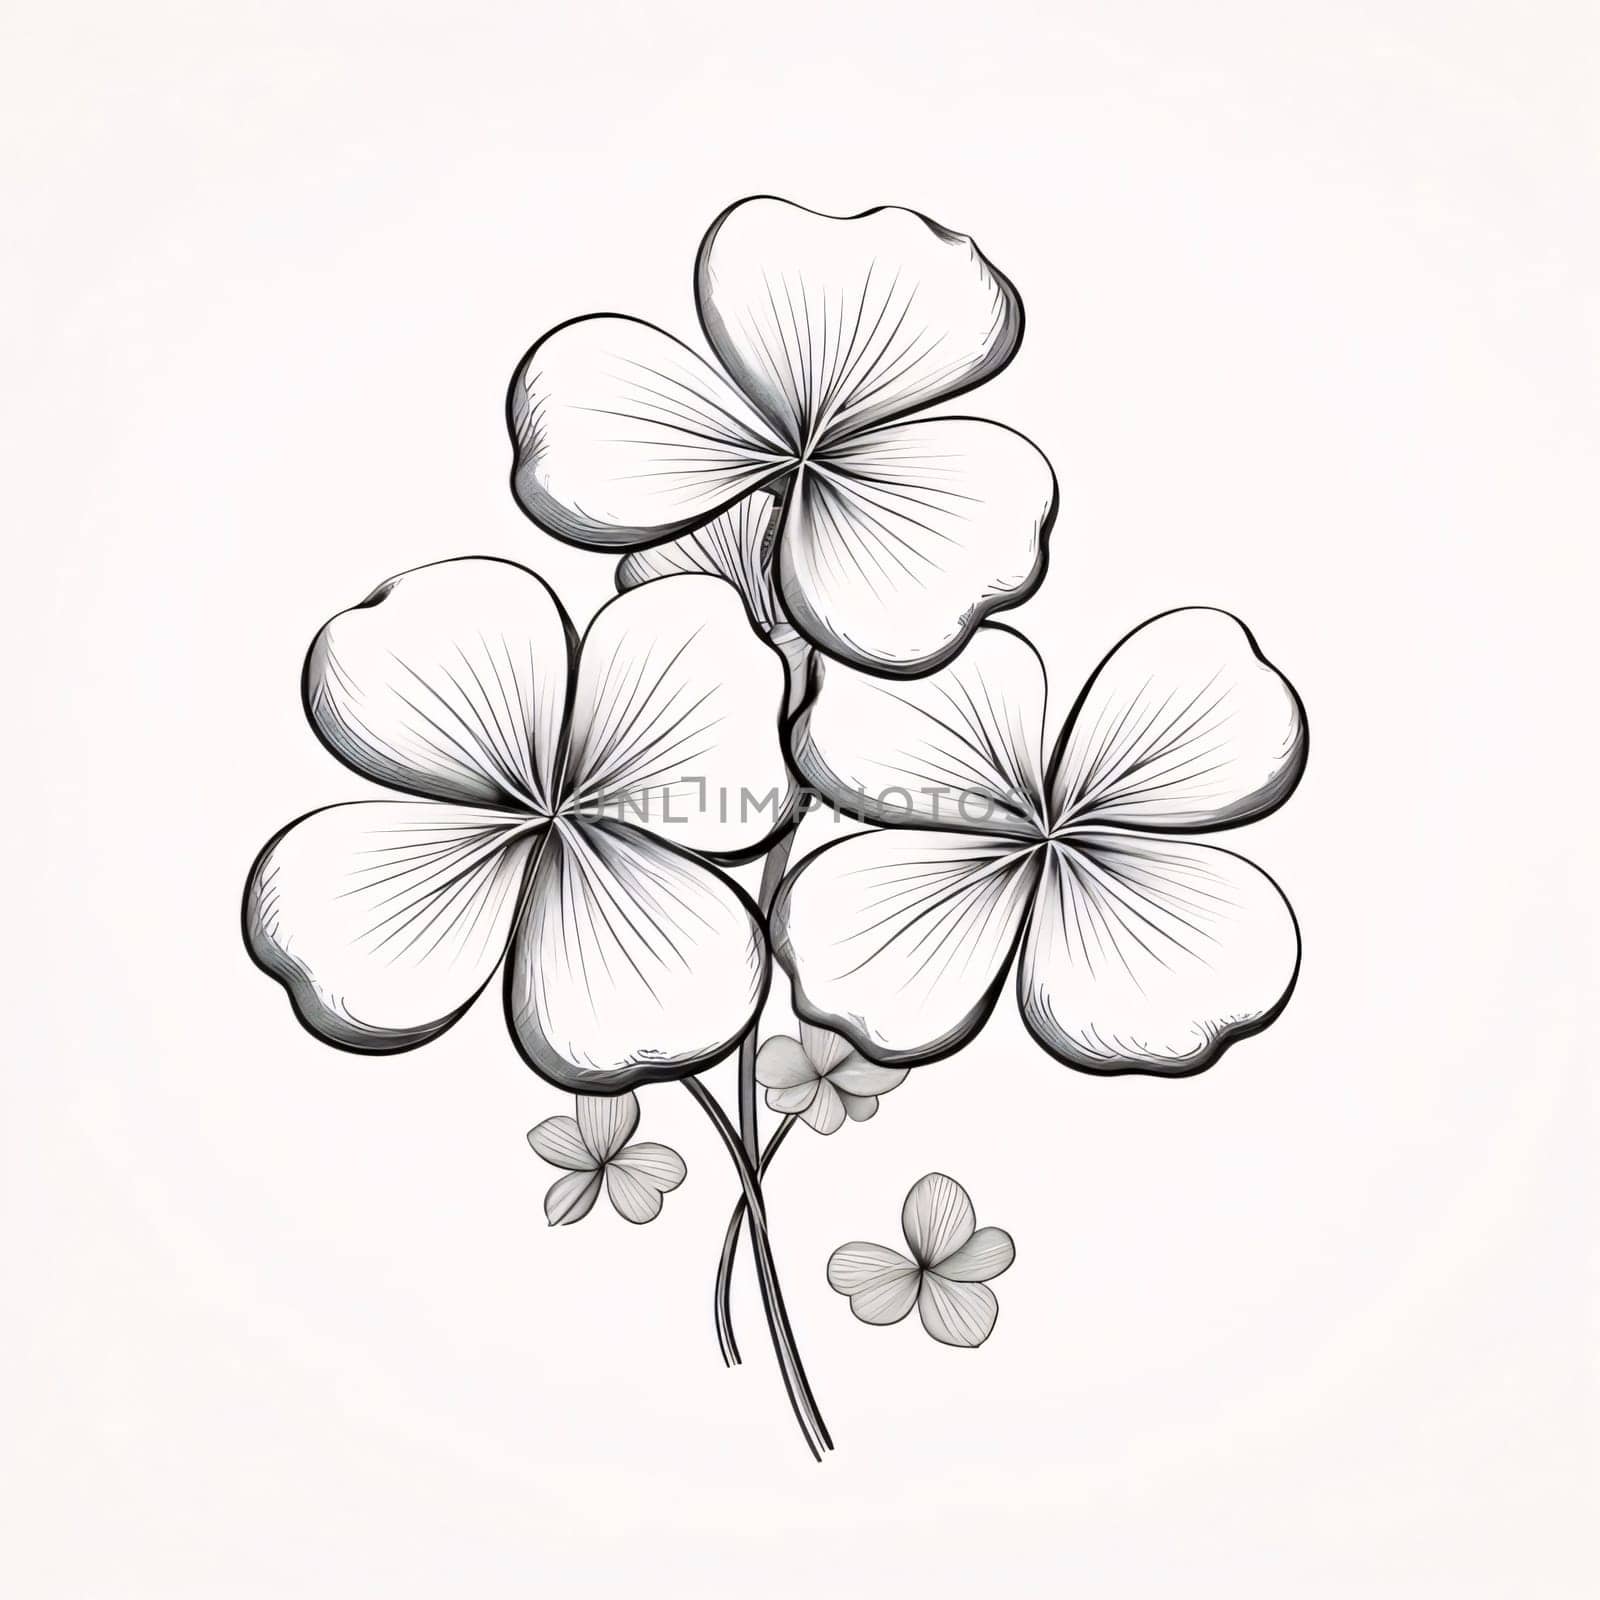 Black and white coloring sheet, four-leaf clover. Green four-leaf clover symbol of St. Patrick's Day. A joyous time of celebration in the green color.